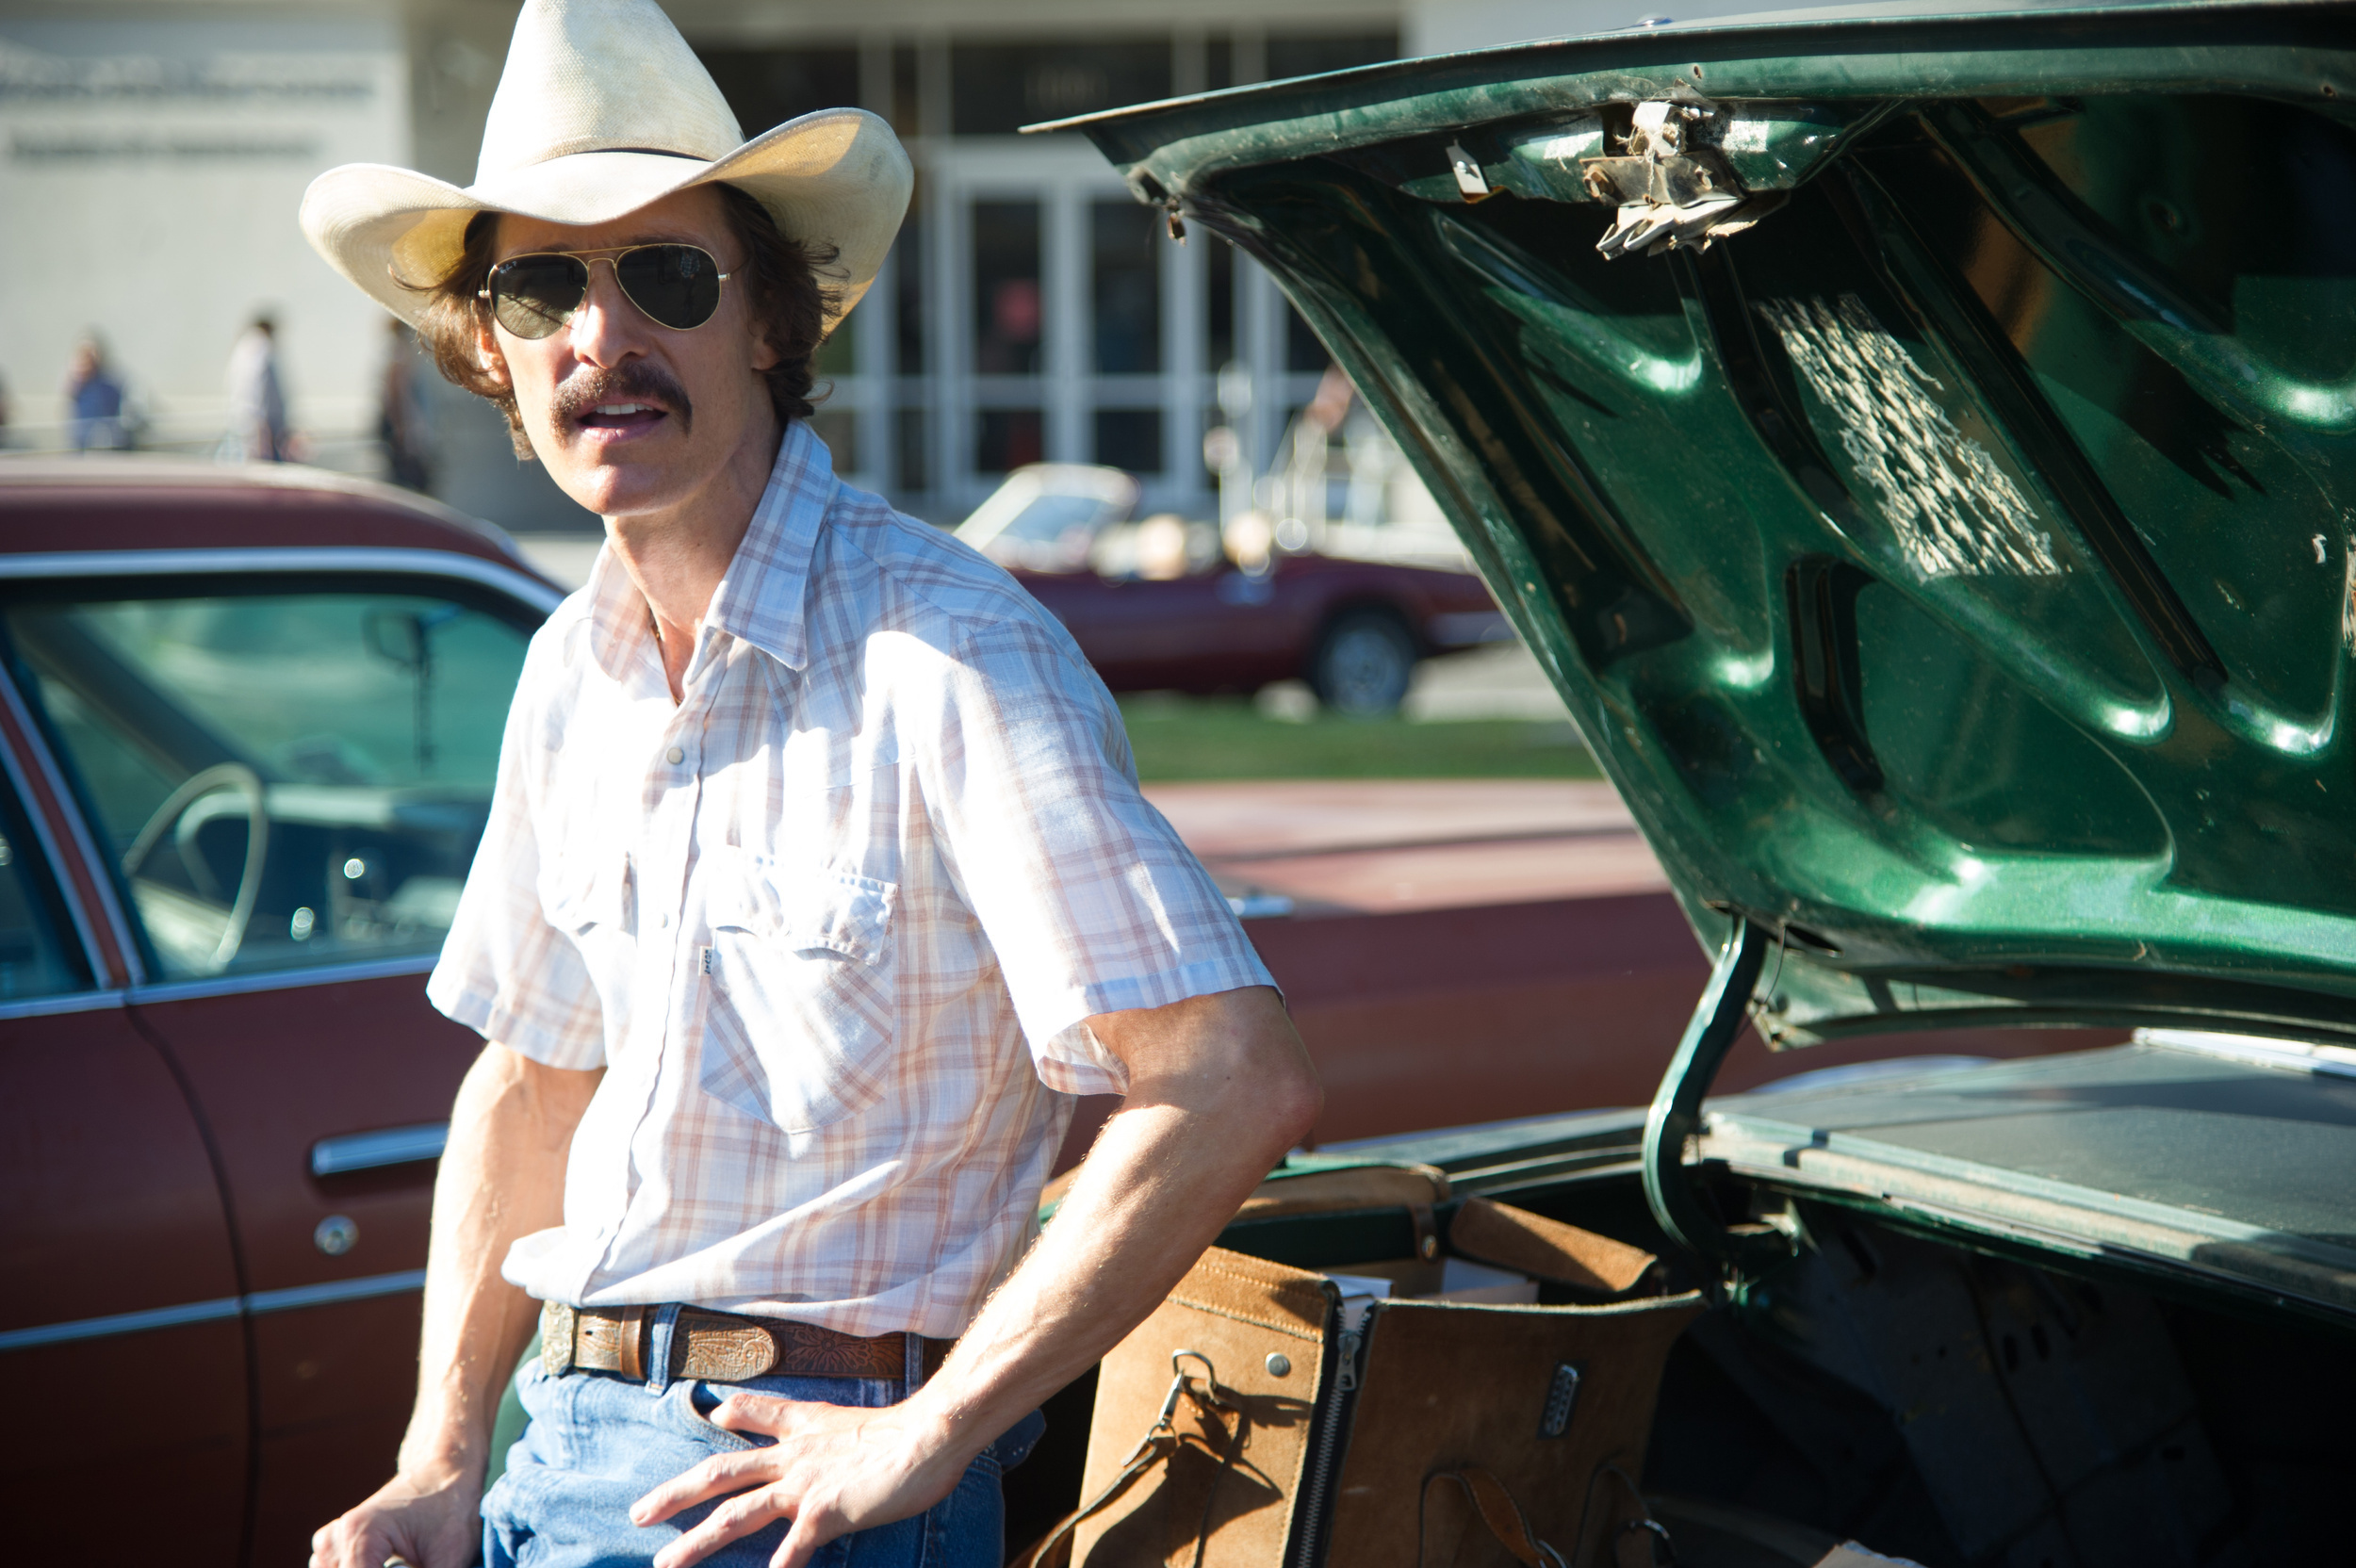 <p>There’s no saying what piece of information regarding a film the general public is going to latch onto, especially as time goes on, but it’s usually not what the filmmakers expected. <em>Dallas Buyers Club</em> is a true story, but the film is marked more by the Oscar-winning performance and Jared Leto’s significant weight loss for the film. </p><p>You may also like: <a href='https://www.yardbarker.com/entertainment/articles/notable_american_music_artistsbands_who_found_greater_success_abroad/s1__40239498'>Notable American music artists/bands who found greater success abroad</a></p>